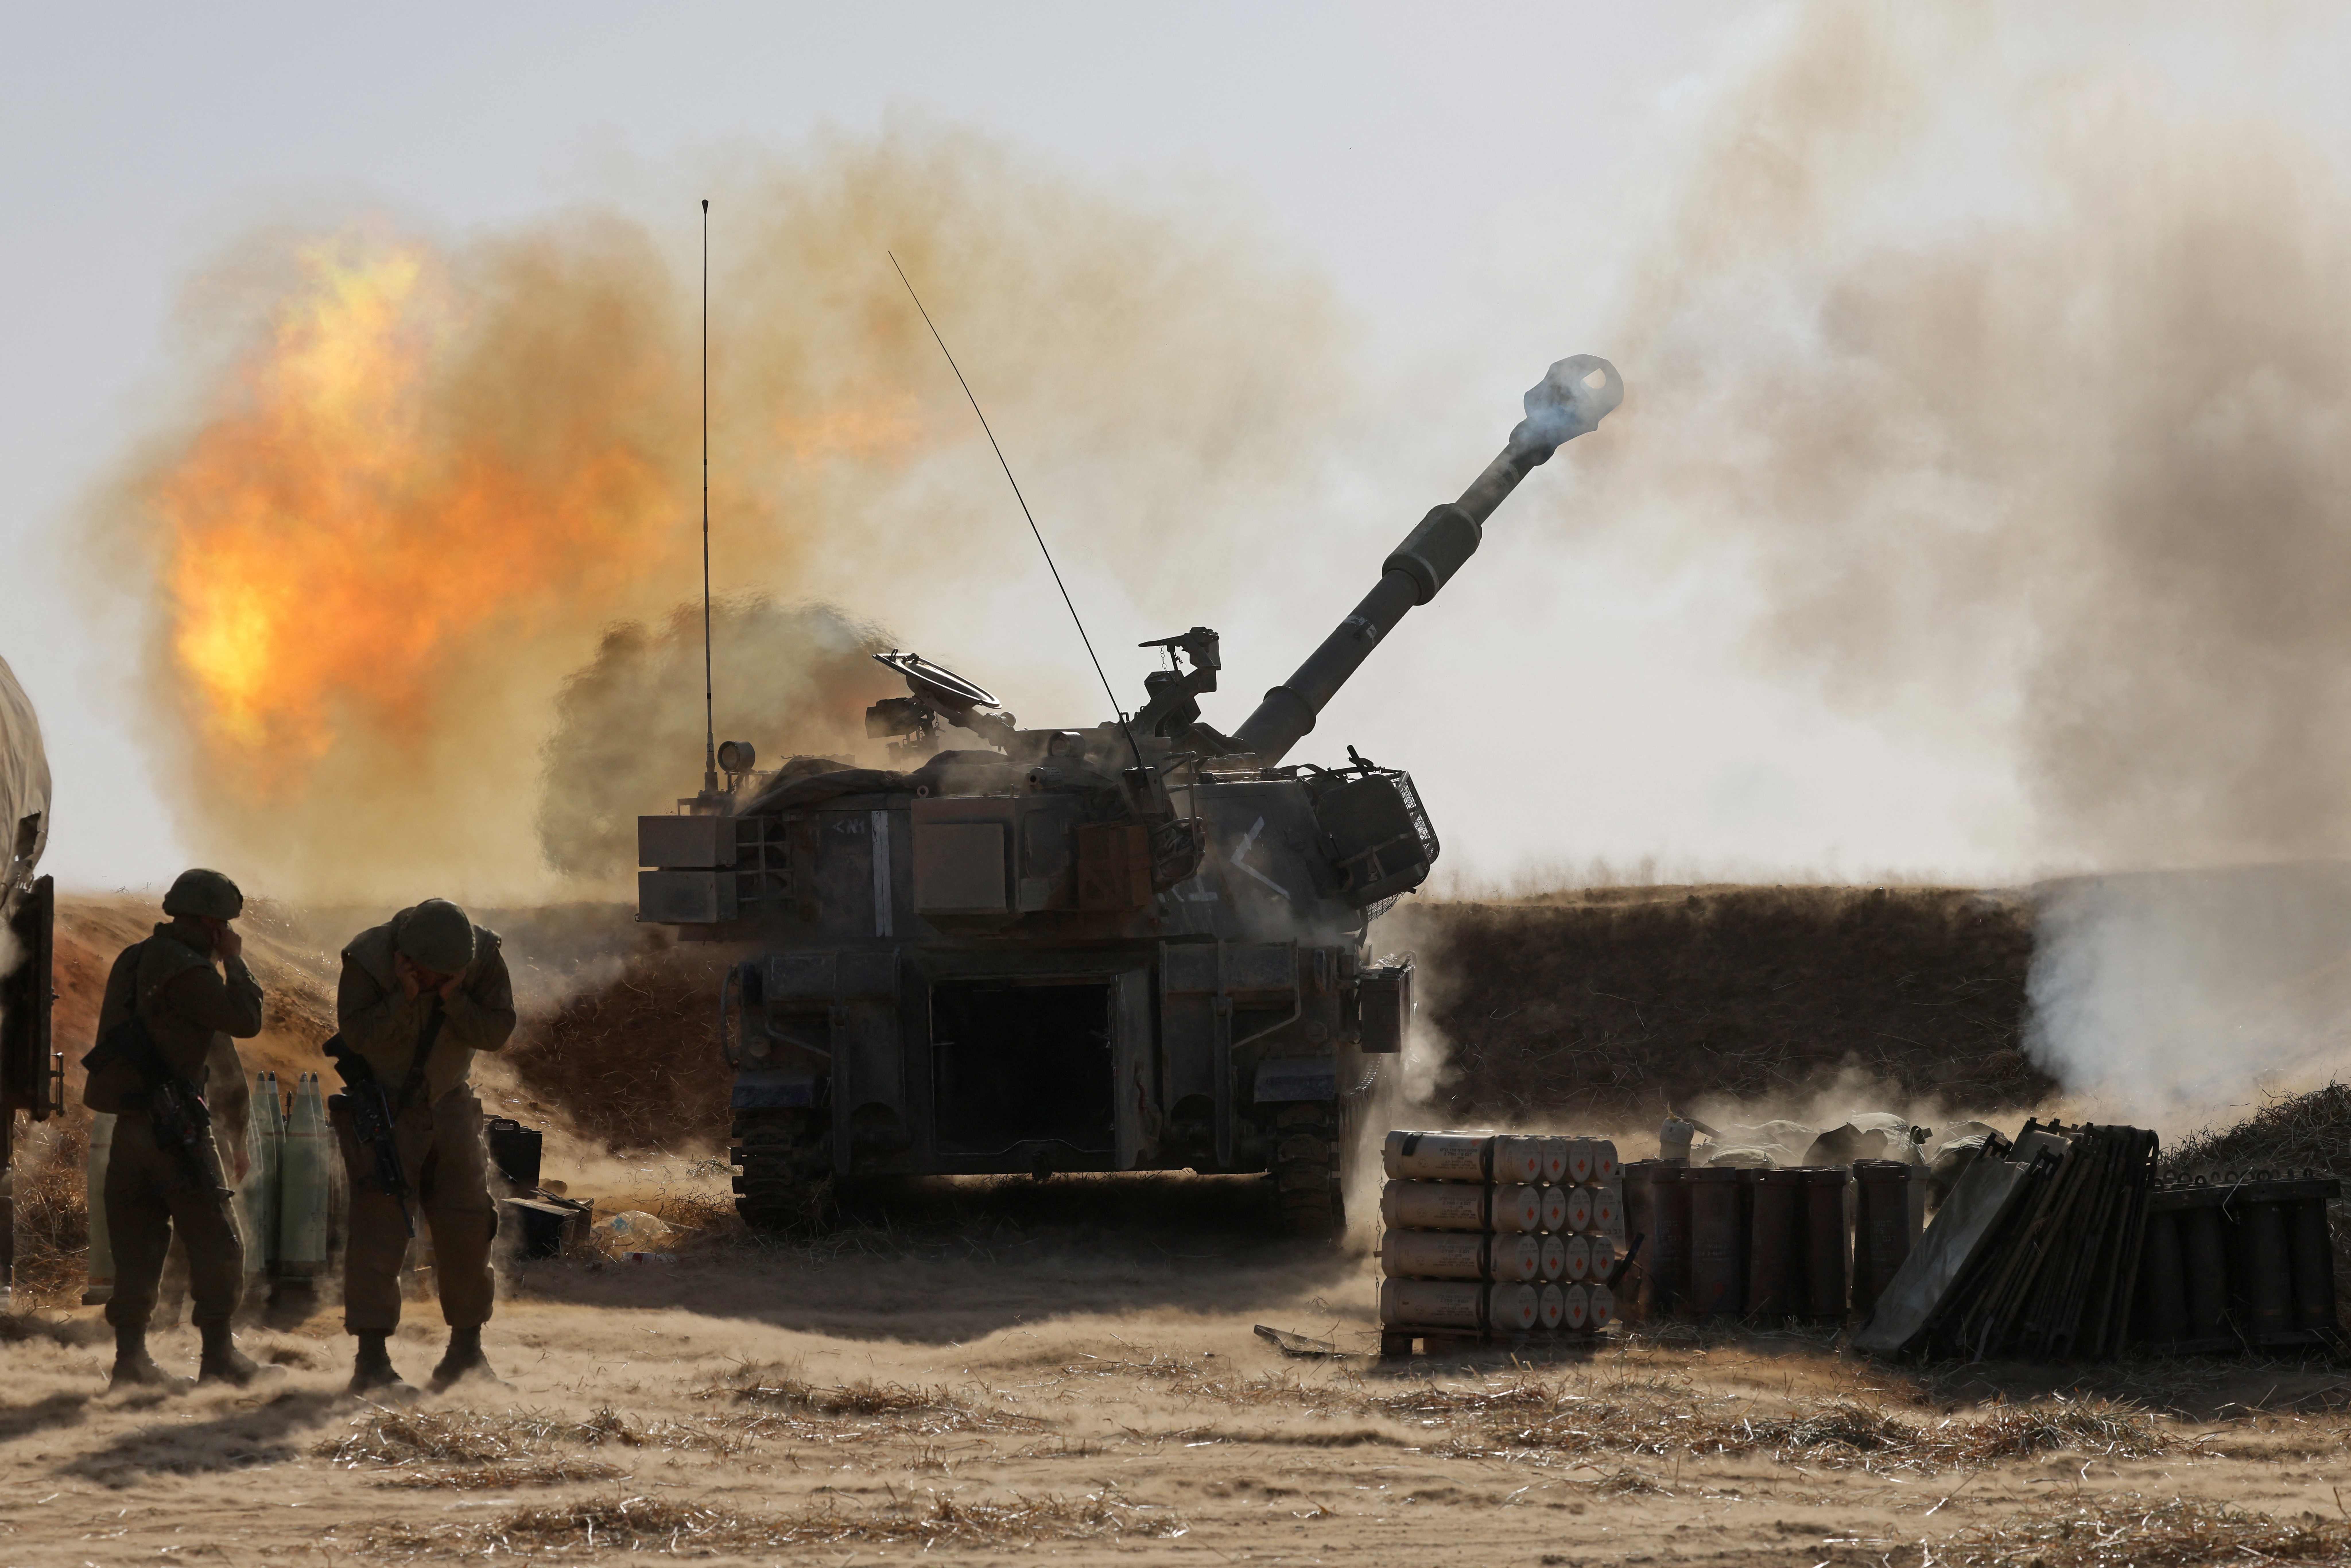 Israeli soldiers fire a 155mm self-propelled howitzer towards targets in the Gaza Strip from their position near the western Israeli city of Sderot